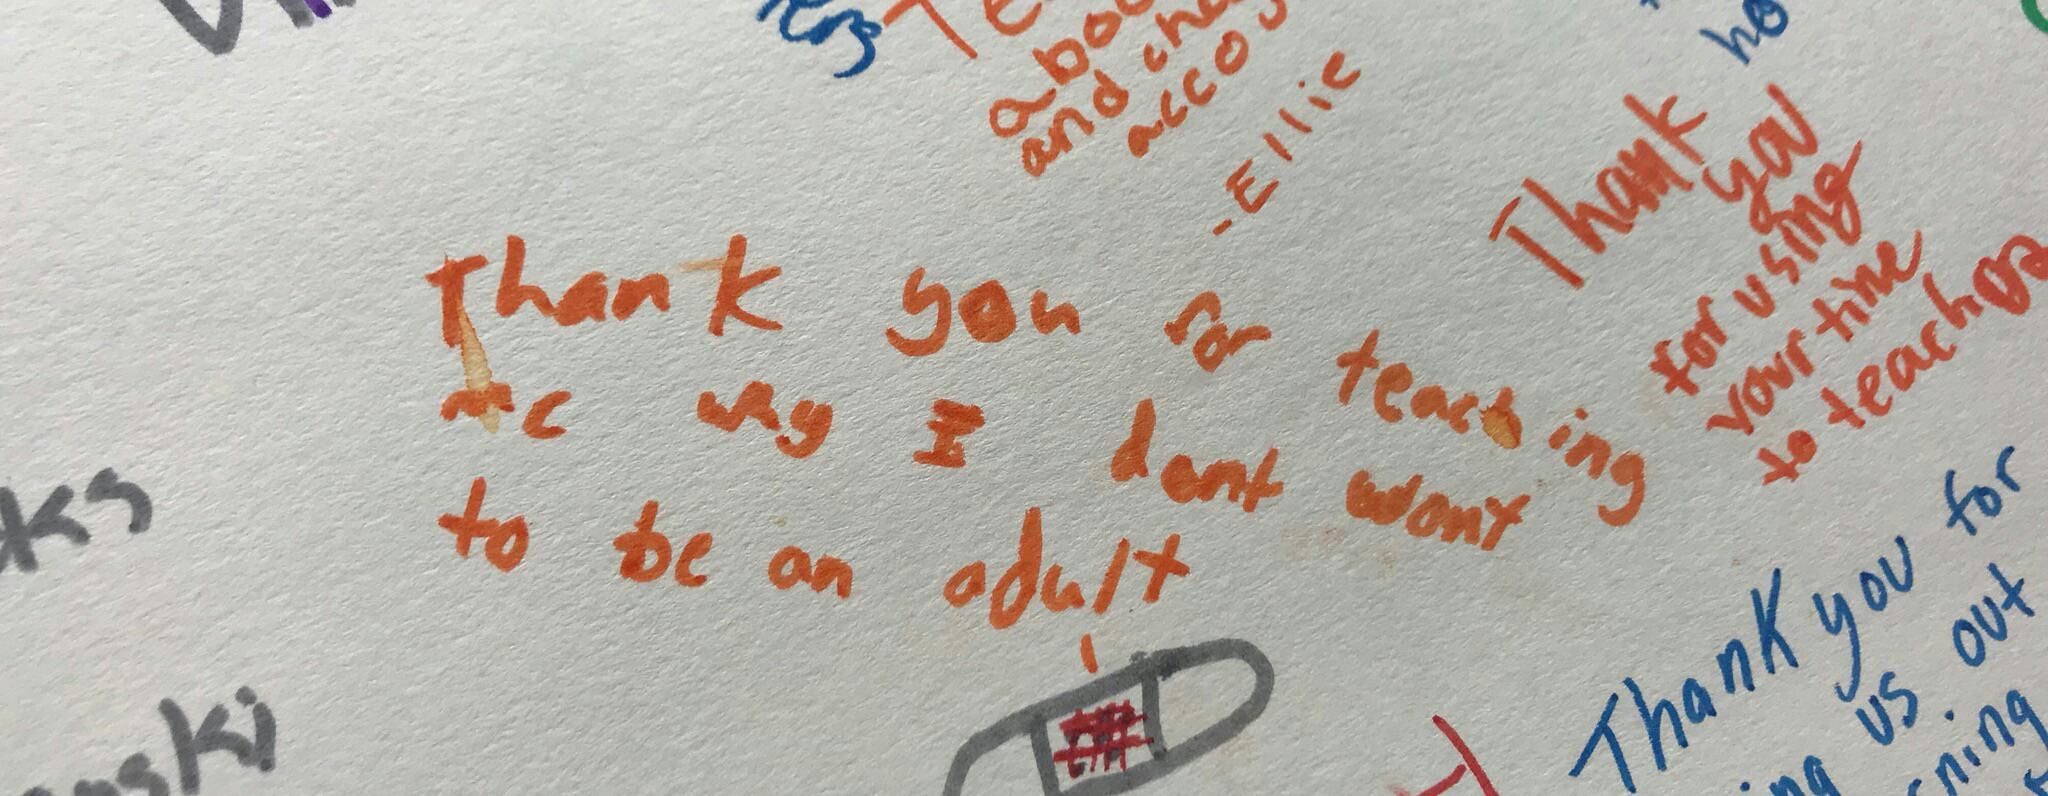 My wife is a financial advisor and recently gave a savings class to 7th graders. This is on her thank you card from them.